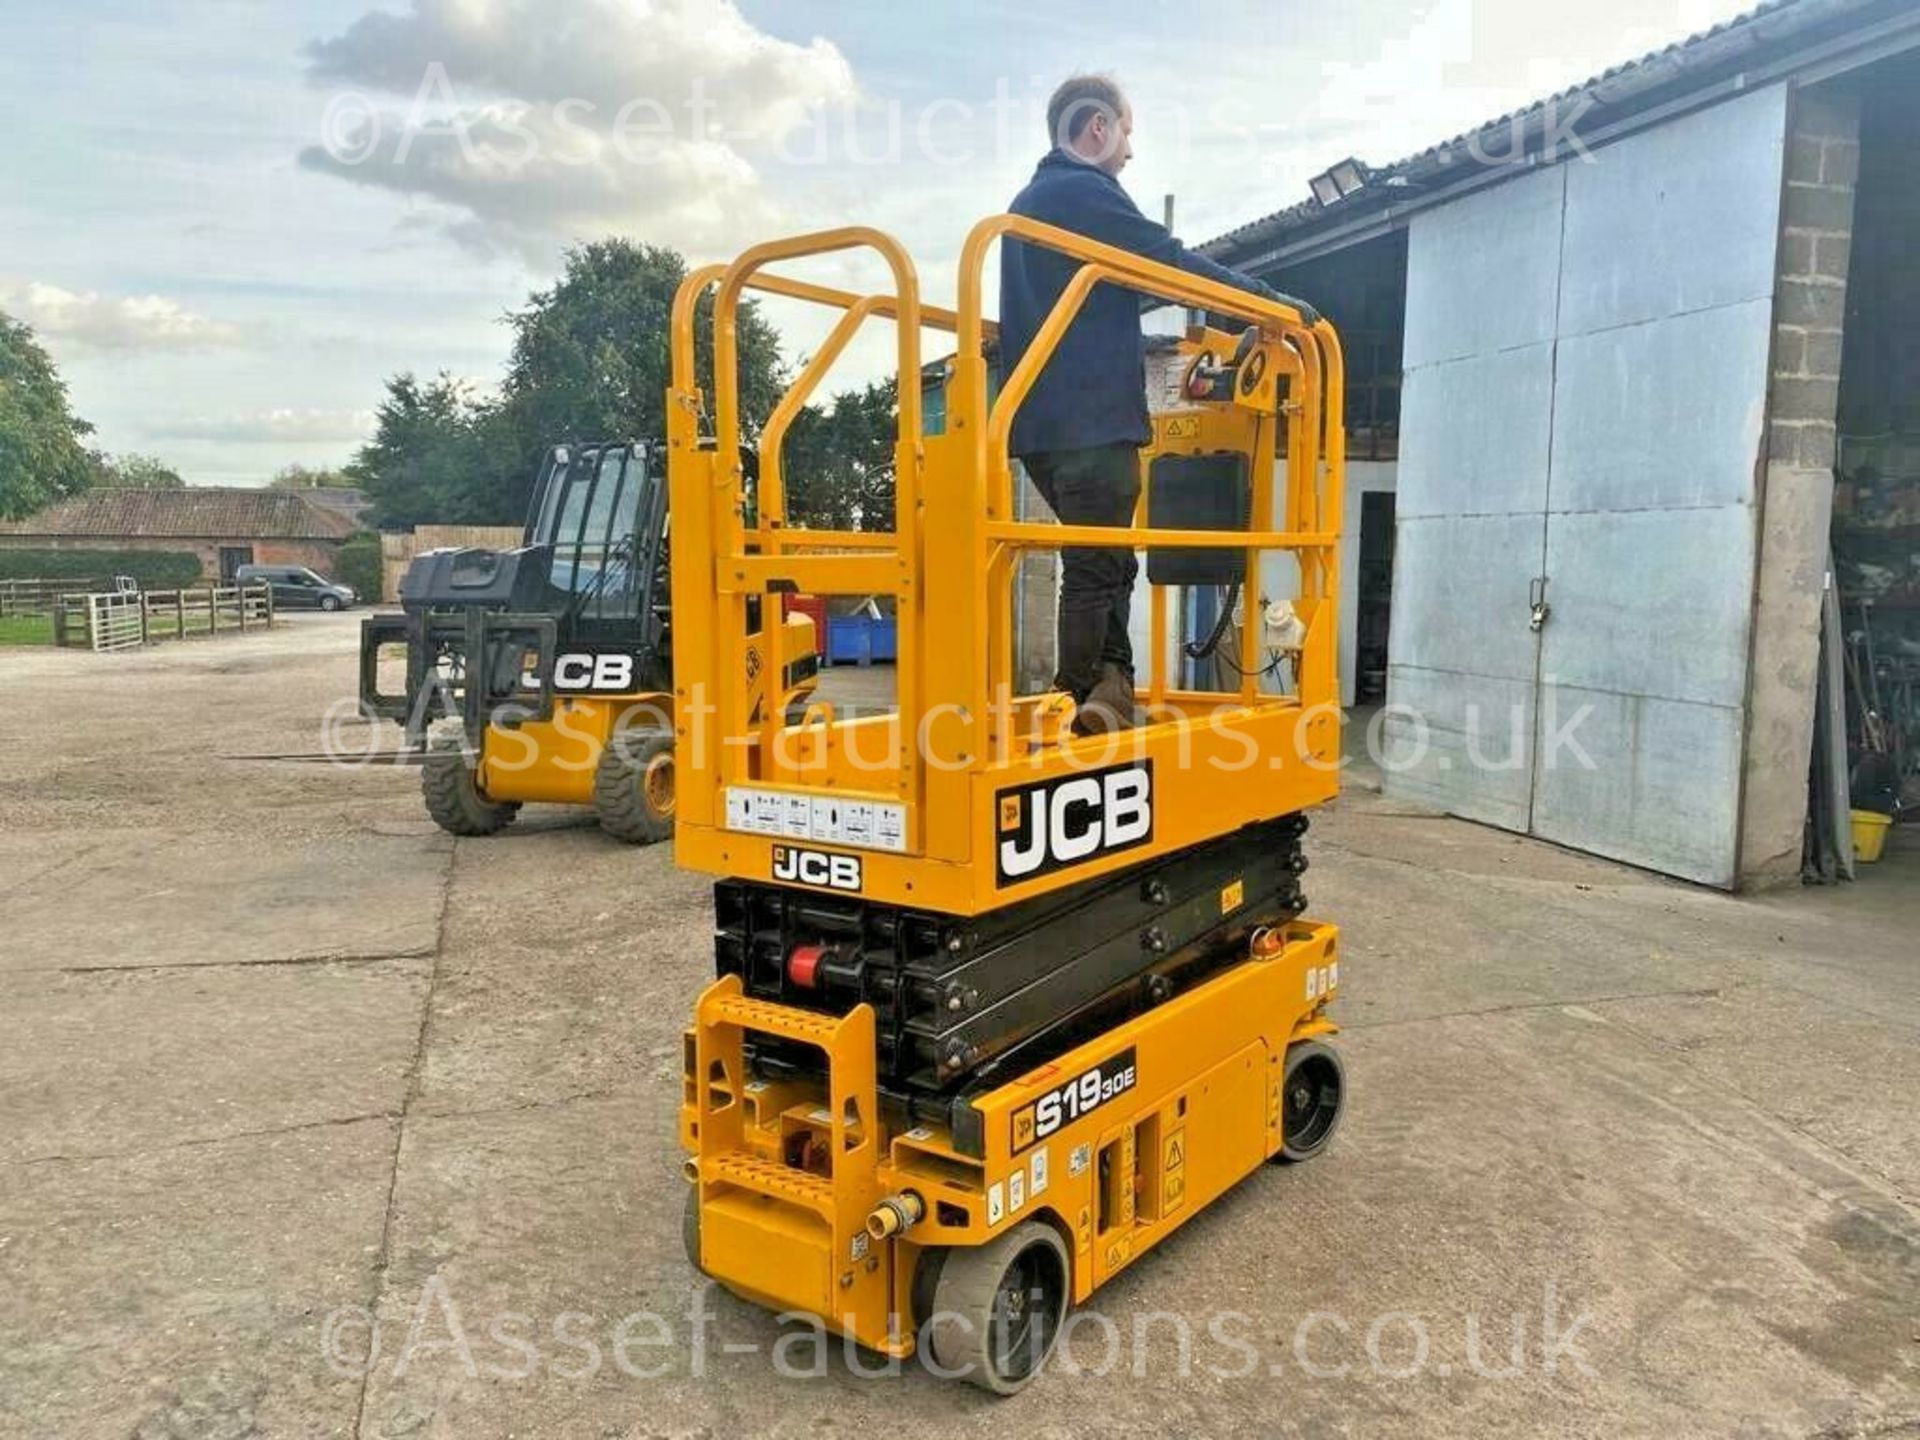 SCISSOR LIFT JCB S1930E ELECTRIC, PLATFORM HEIGHT 5.8m/ 19ft, ONLY 98.4 HOURS, YEAR 2018 *PLUS VAT* - Image 3 of 14